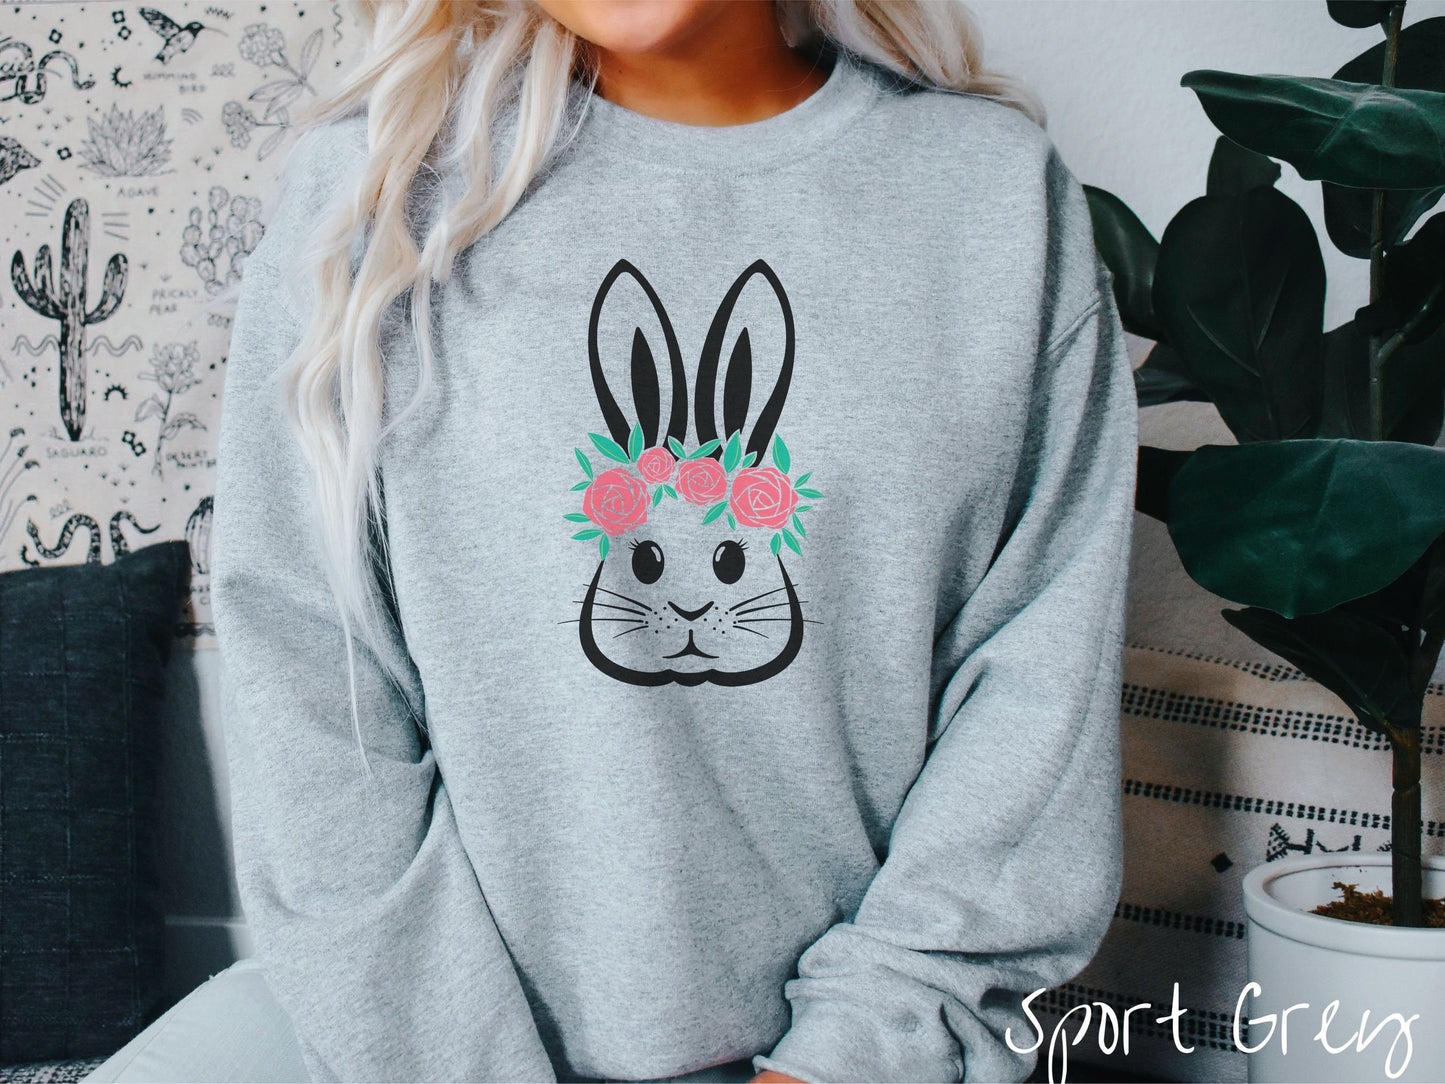 A woman wearing a cute, vintage sport grey colored sweatshirt with a black outline of a bunny rabbit with eyelashes, whiskers, and floppy ears that has a pink flowered headband resting below its large ears.